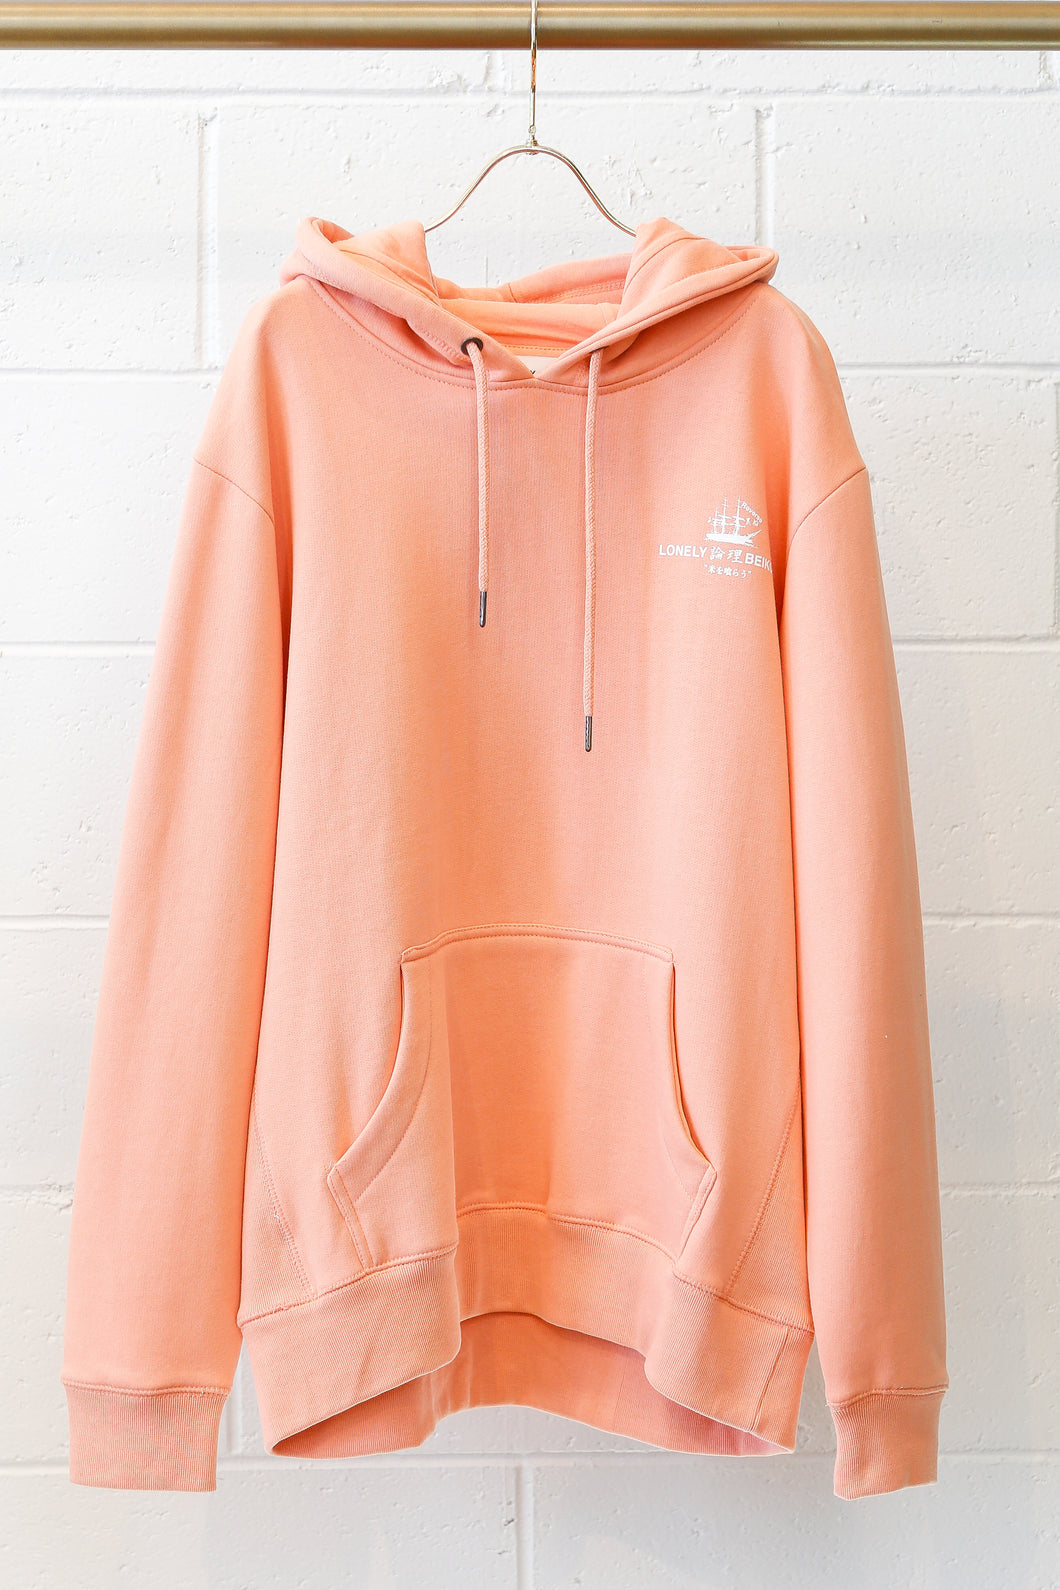 Lonely Girls Hoodie (Pink)